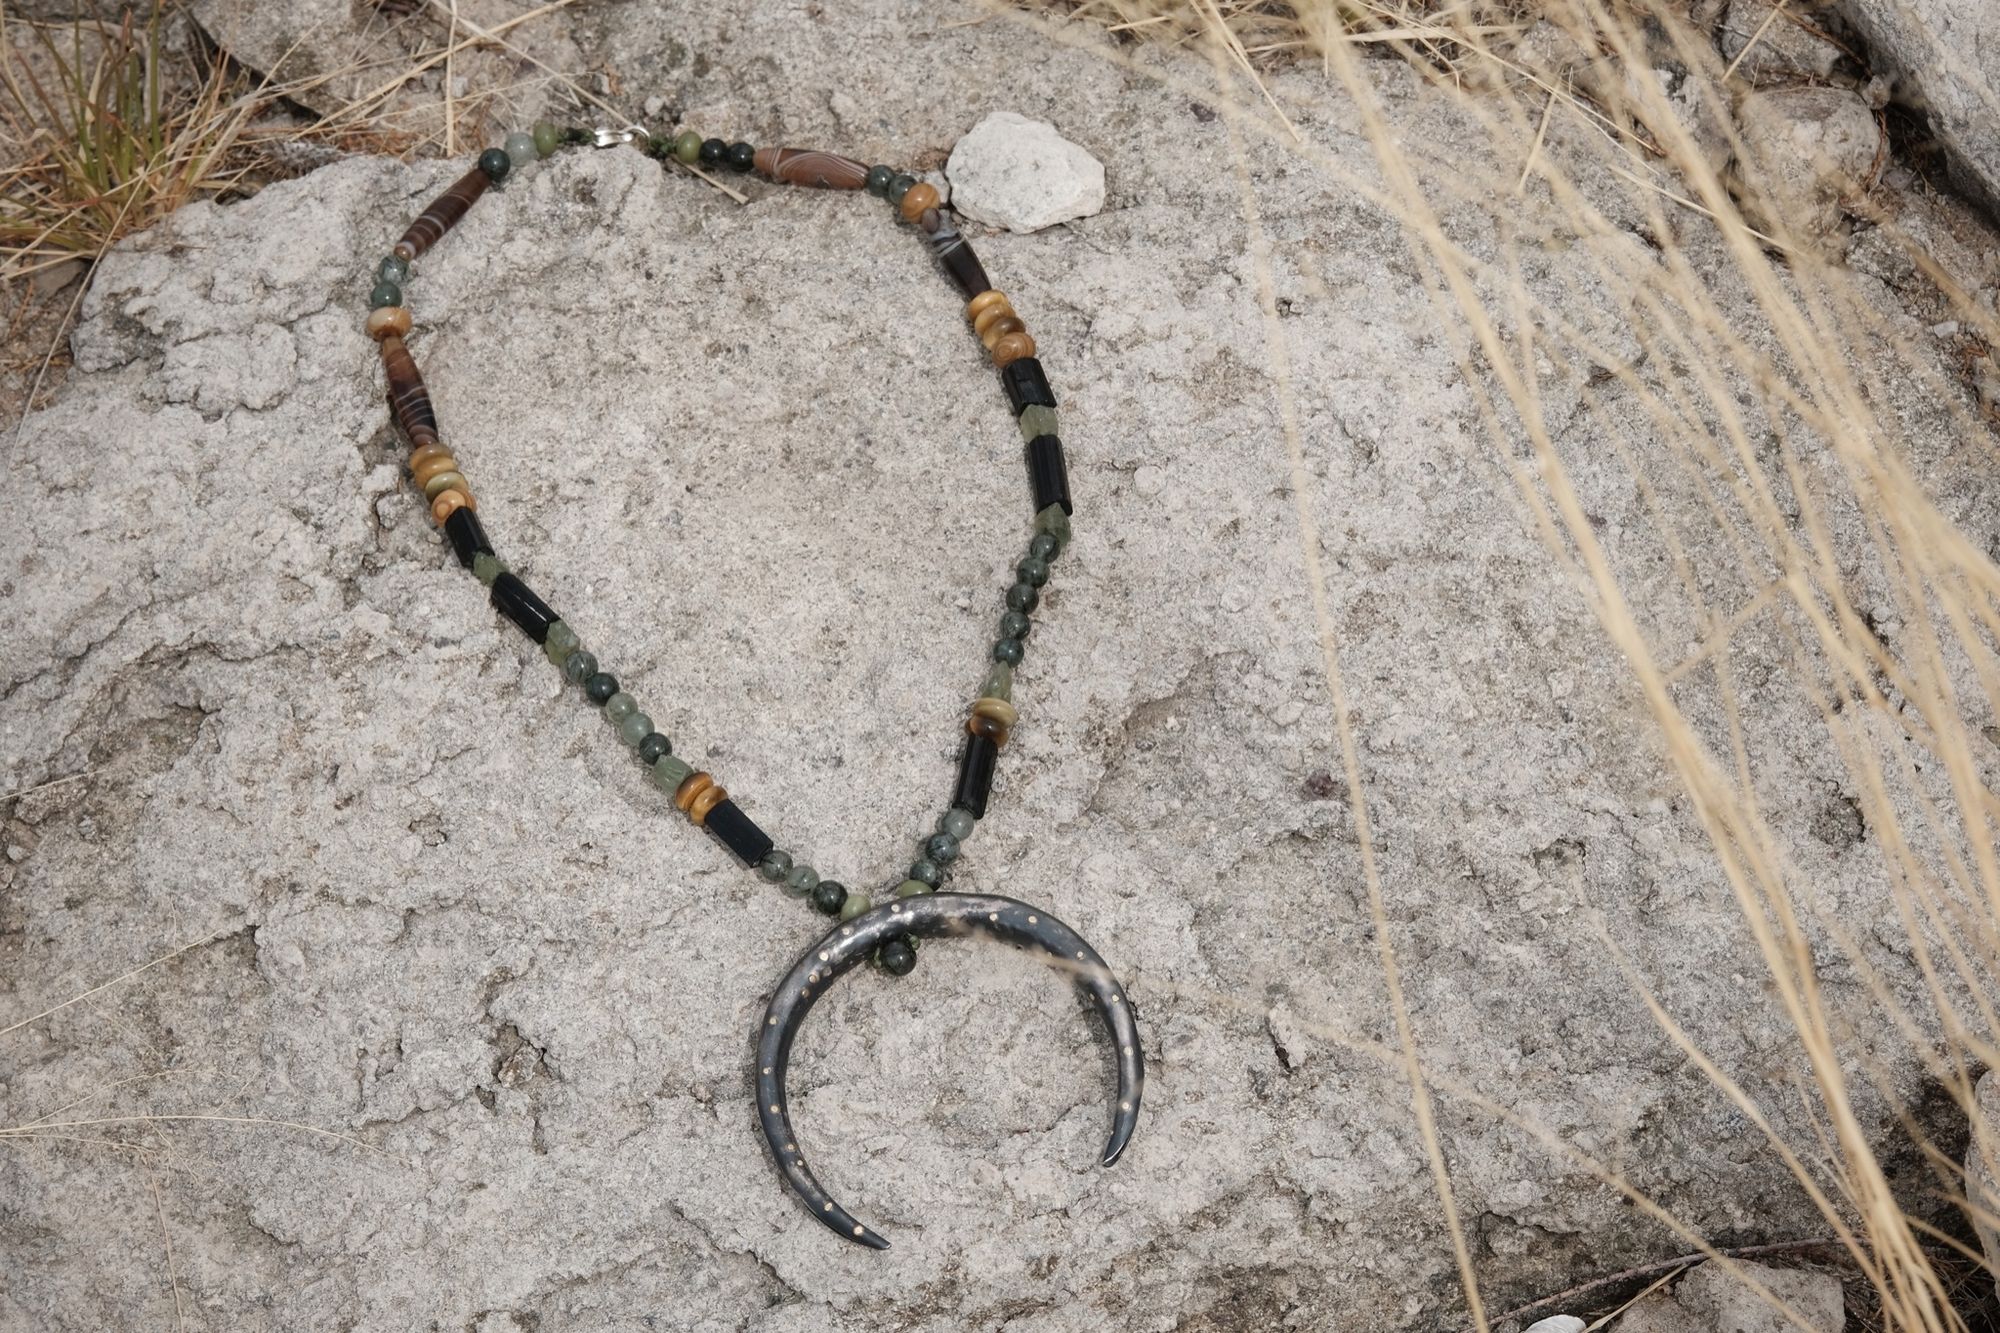 A necklace of brown, green, tan and black semi precious stone beads with a silver and gold moon at the center rests on white stones in the grass